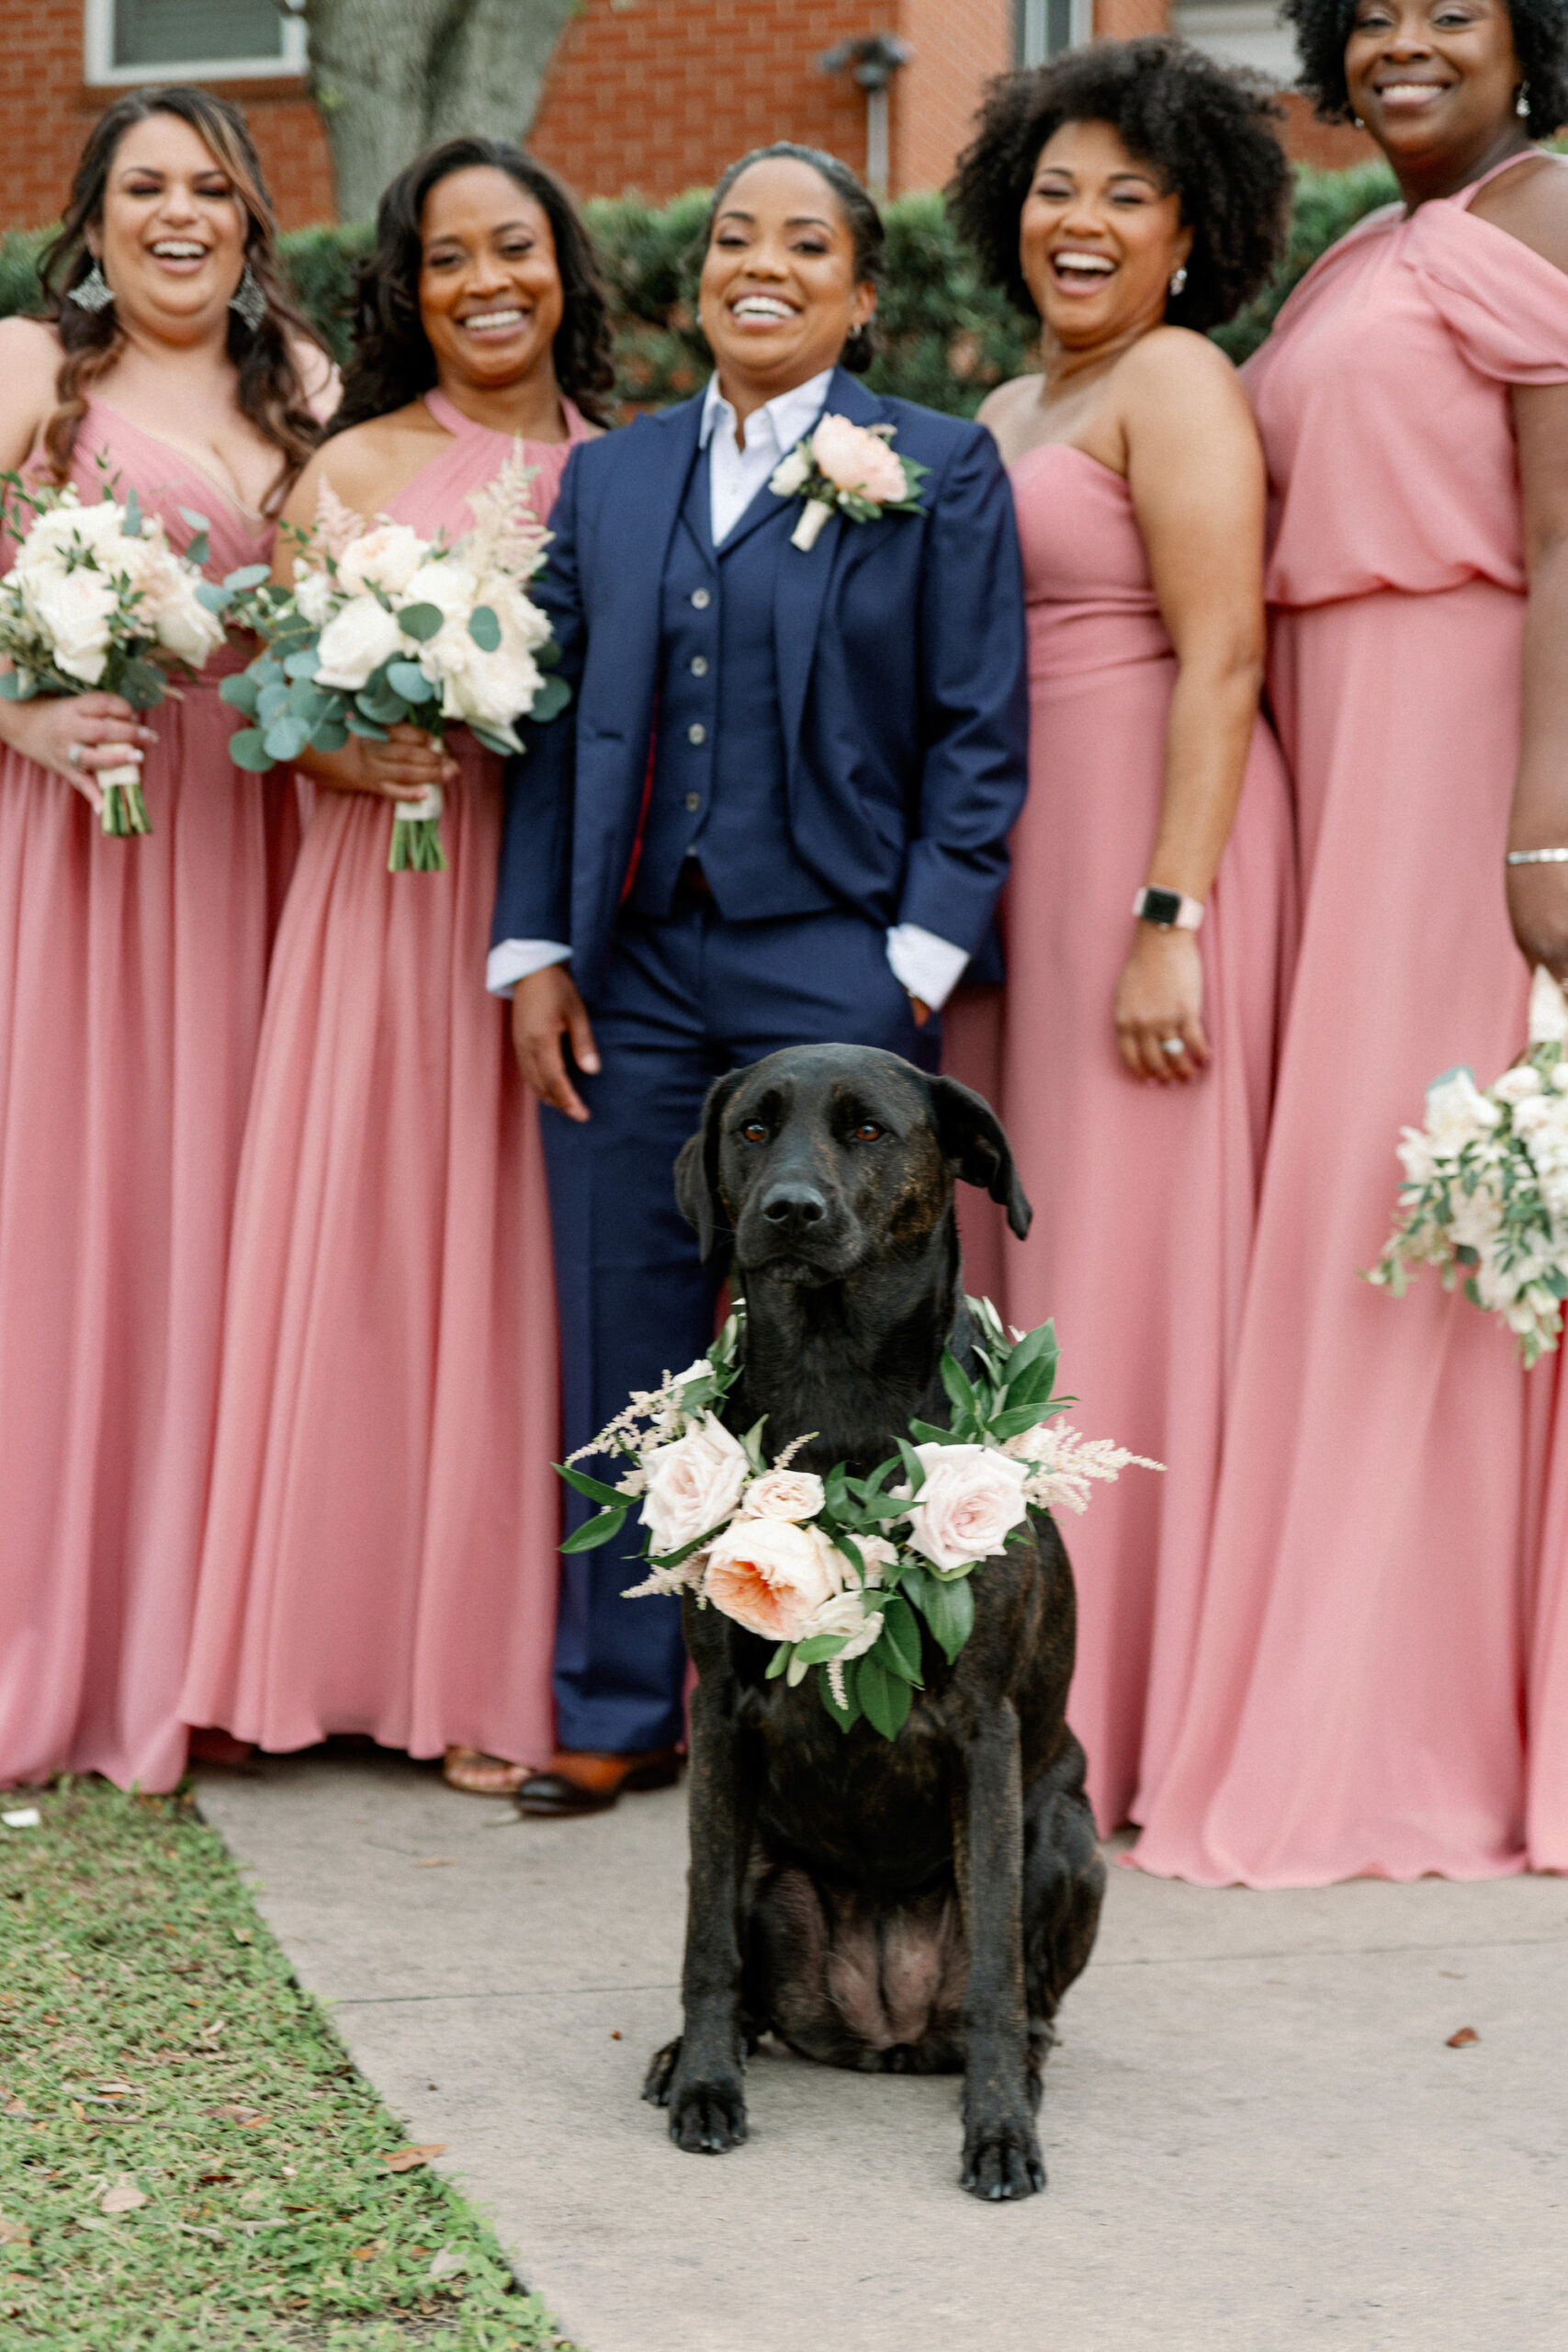 Same Sex Lesbian Wedding, Bride Wearing Blue Suit with Bridesmaids in Mix and Match Pink Dresses Holding Lush White and Greenery Floral Bouquets with Dog in Floral Collar | Tampa Bay Wedding Photographer Dewitt for Love Photography | Wedding Hair and Makeup Imago Dei by Milan